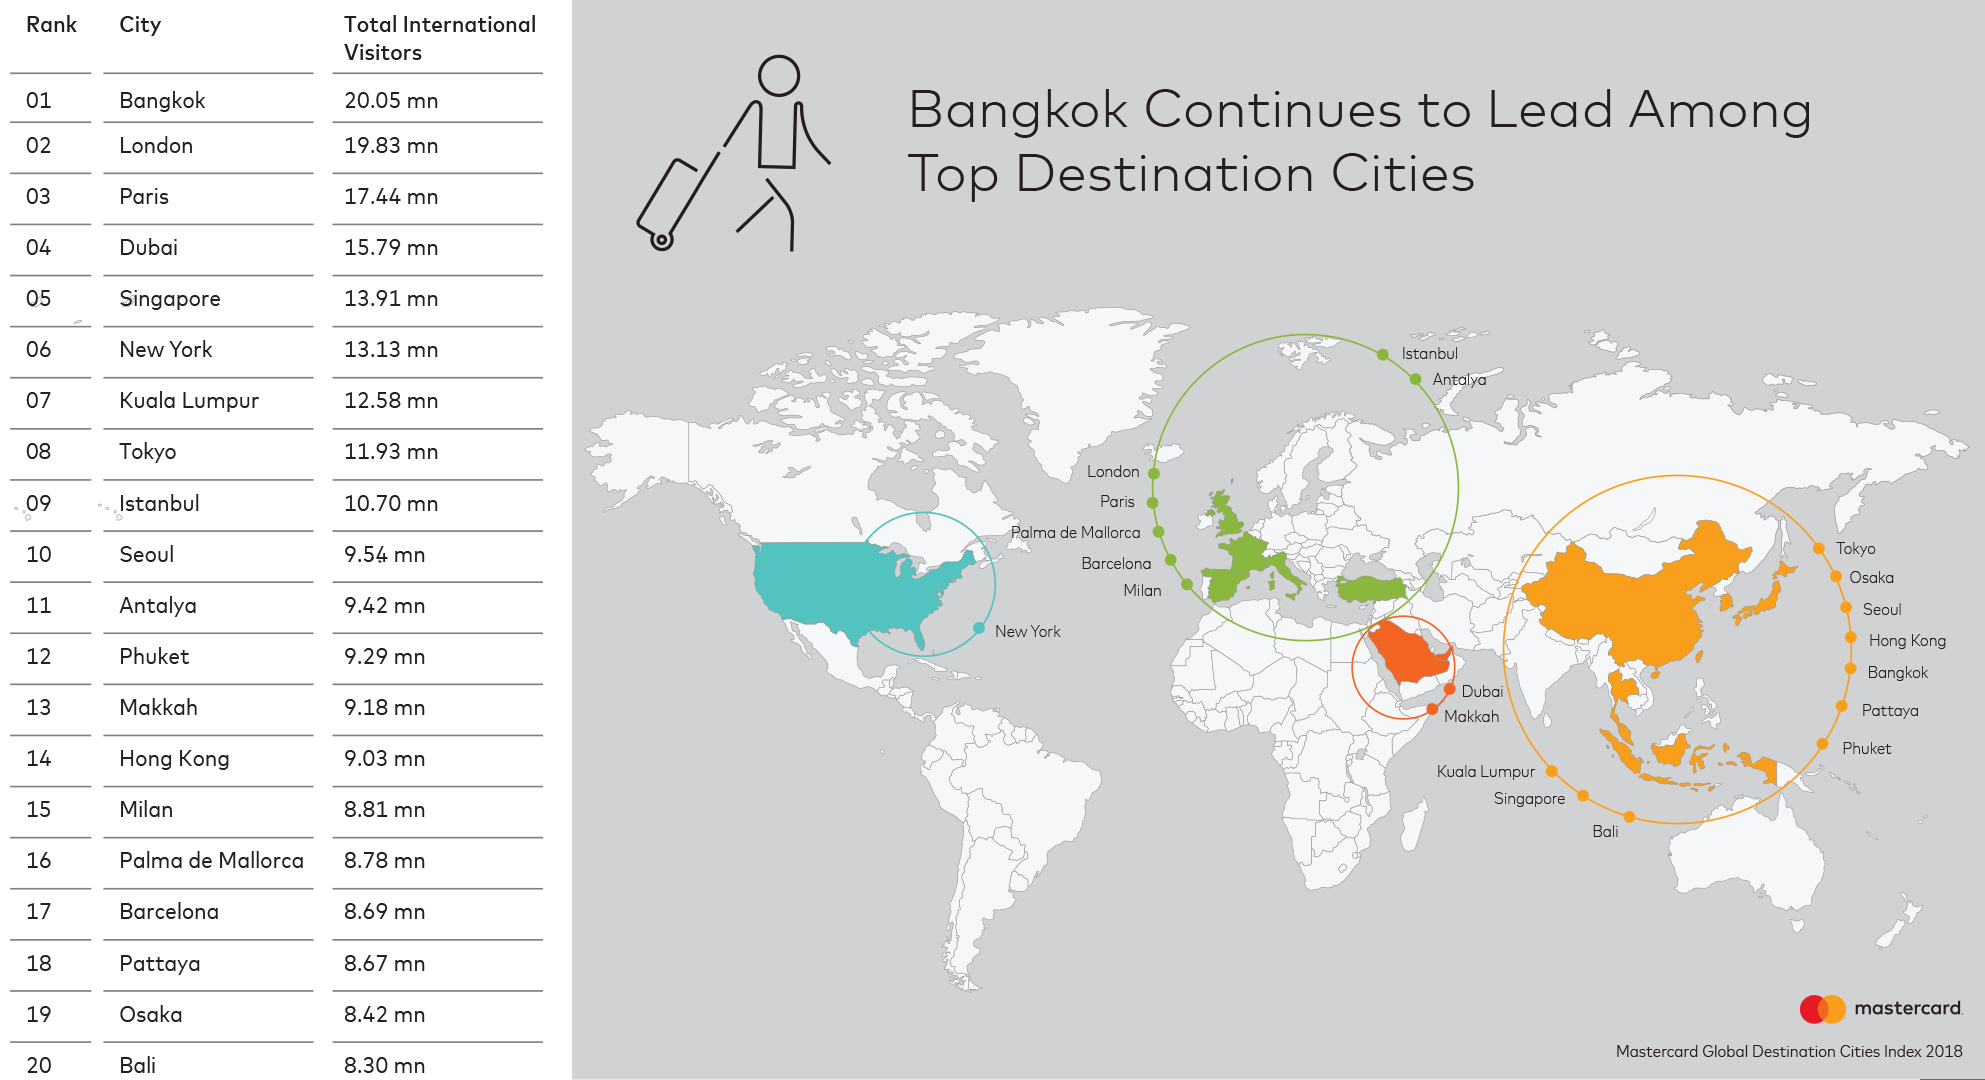  MasterCard’s annual Global Destination Cities Index 2018